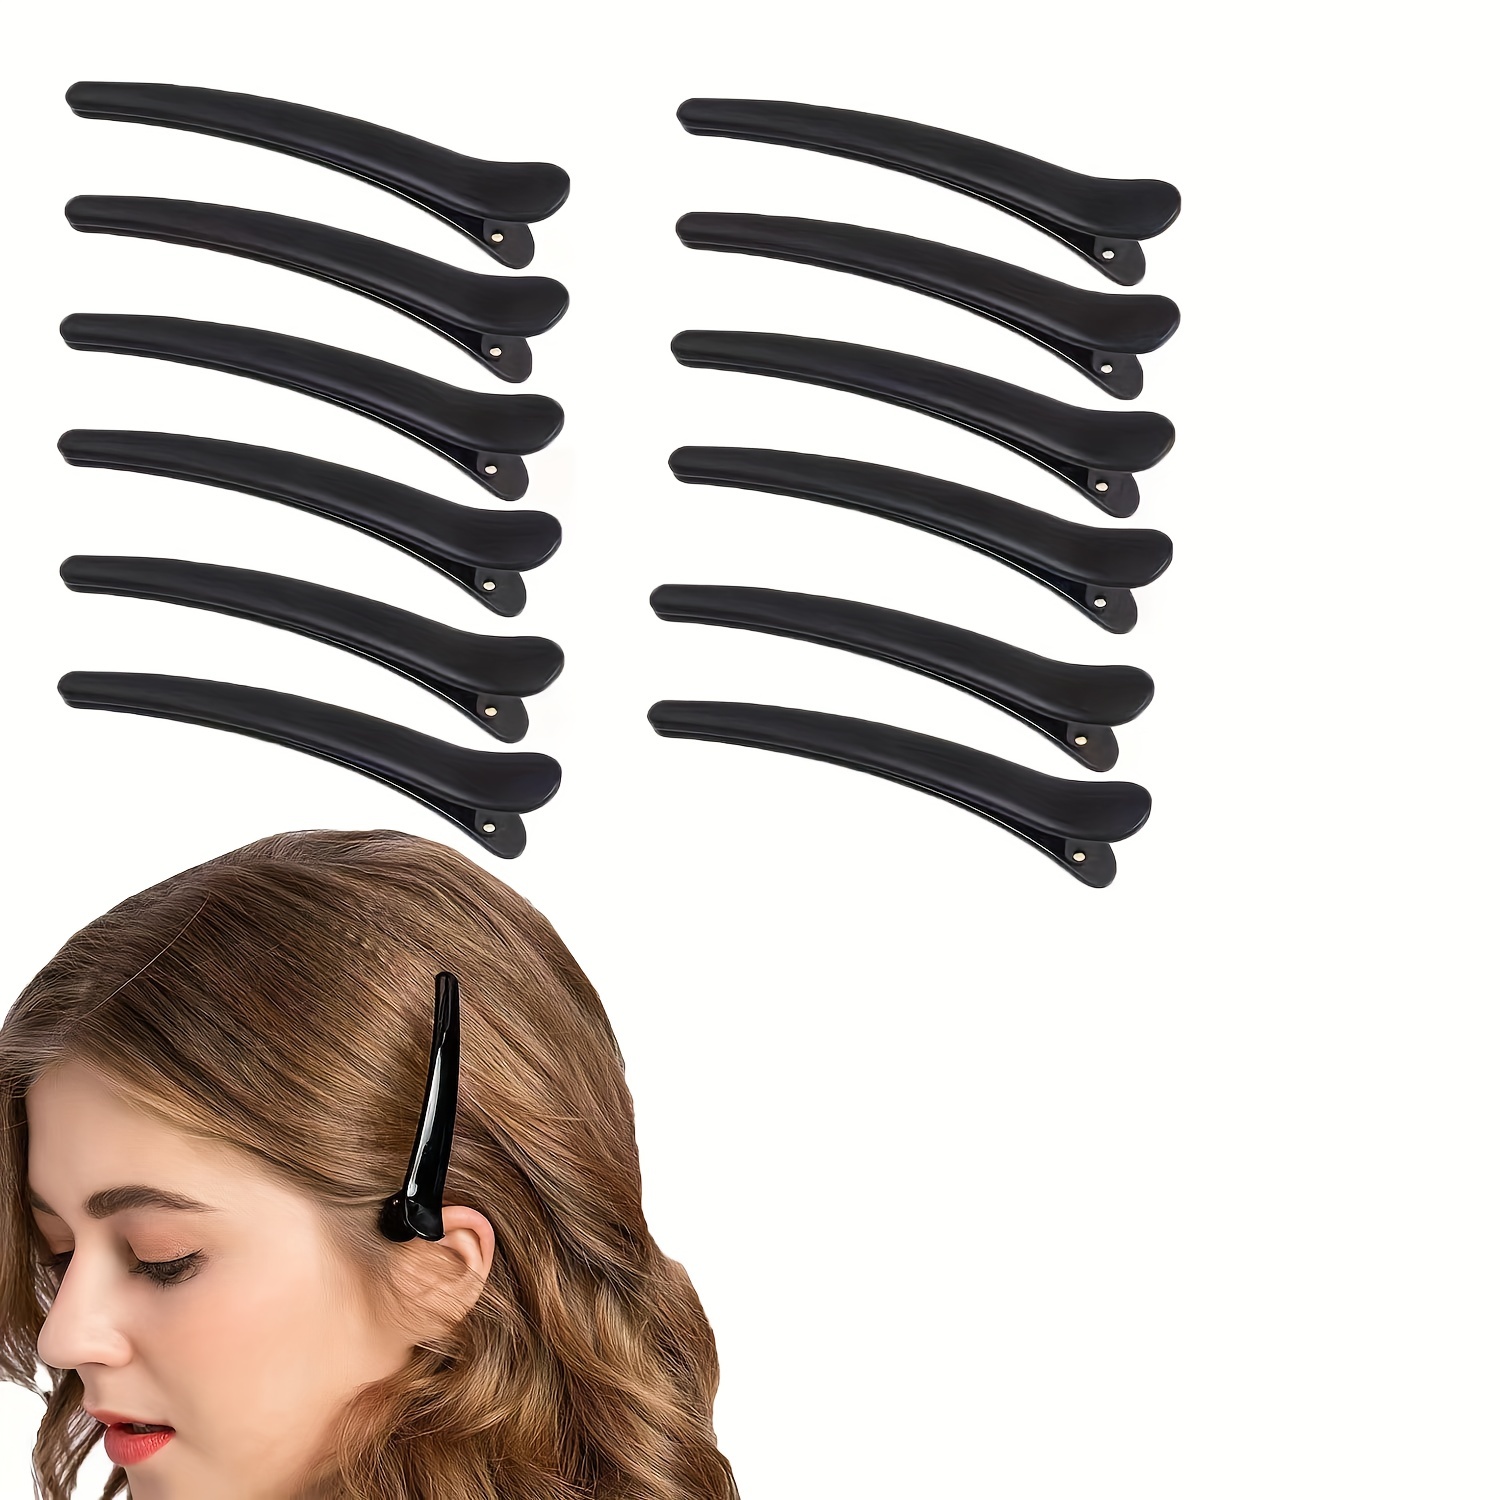 

12pcs Black Frosted Duckbill Clips Set Simple Vintage Side Clip Salon Styling Hair Clips Hair Accessories